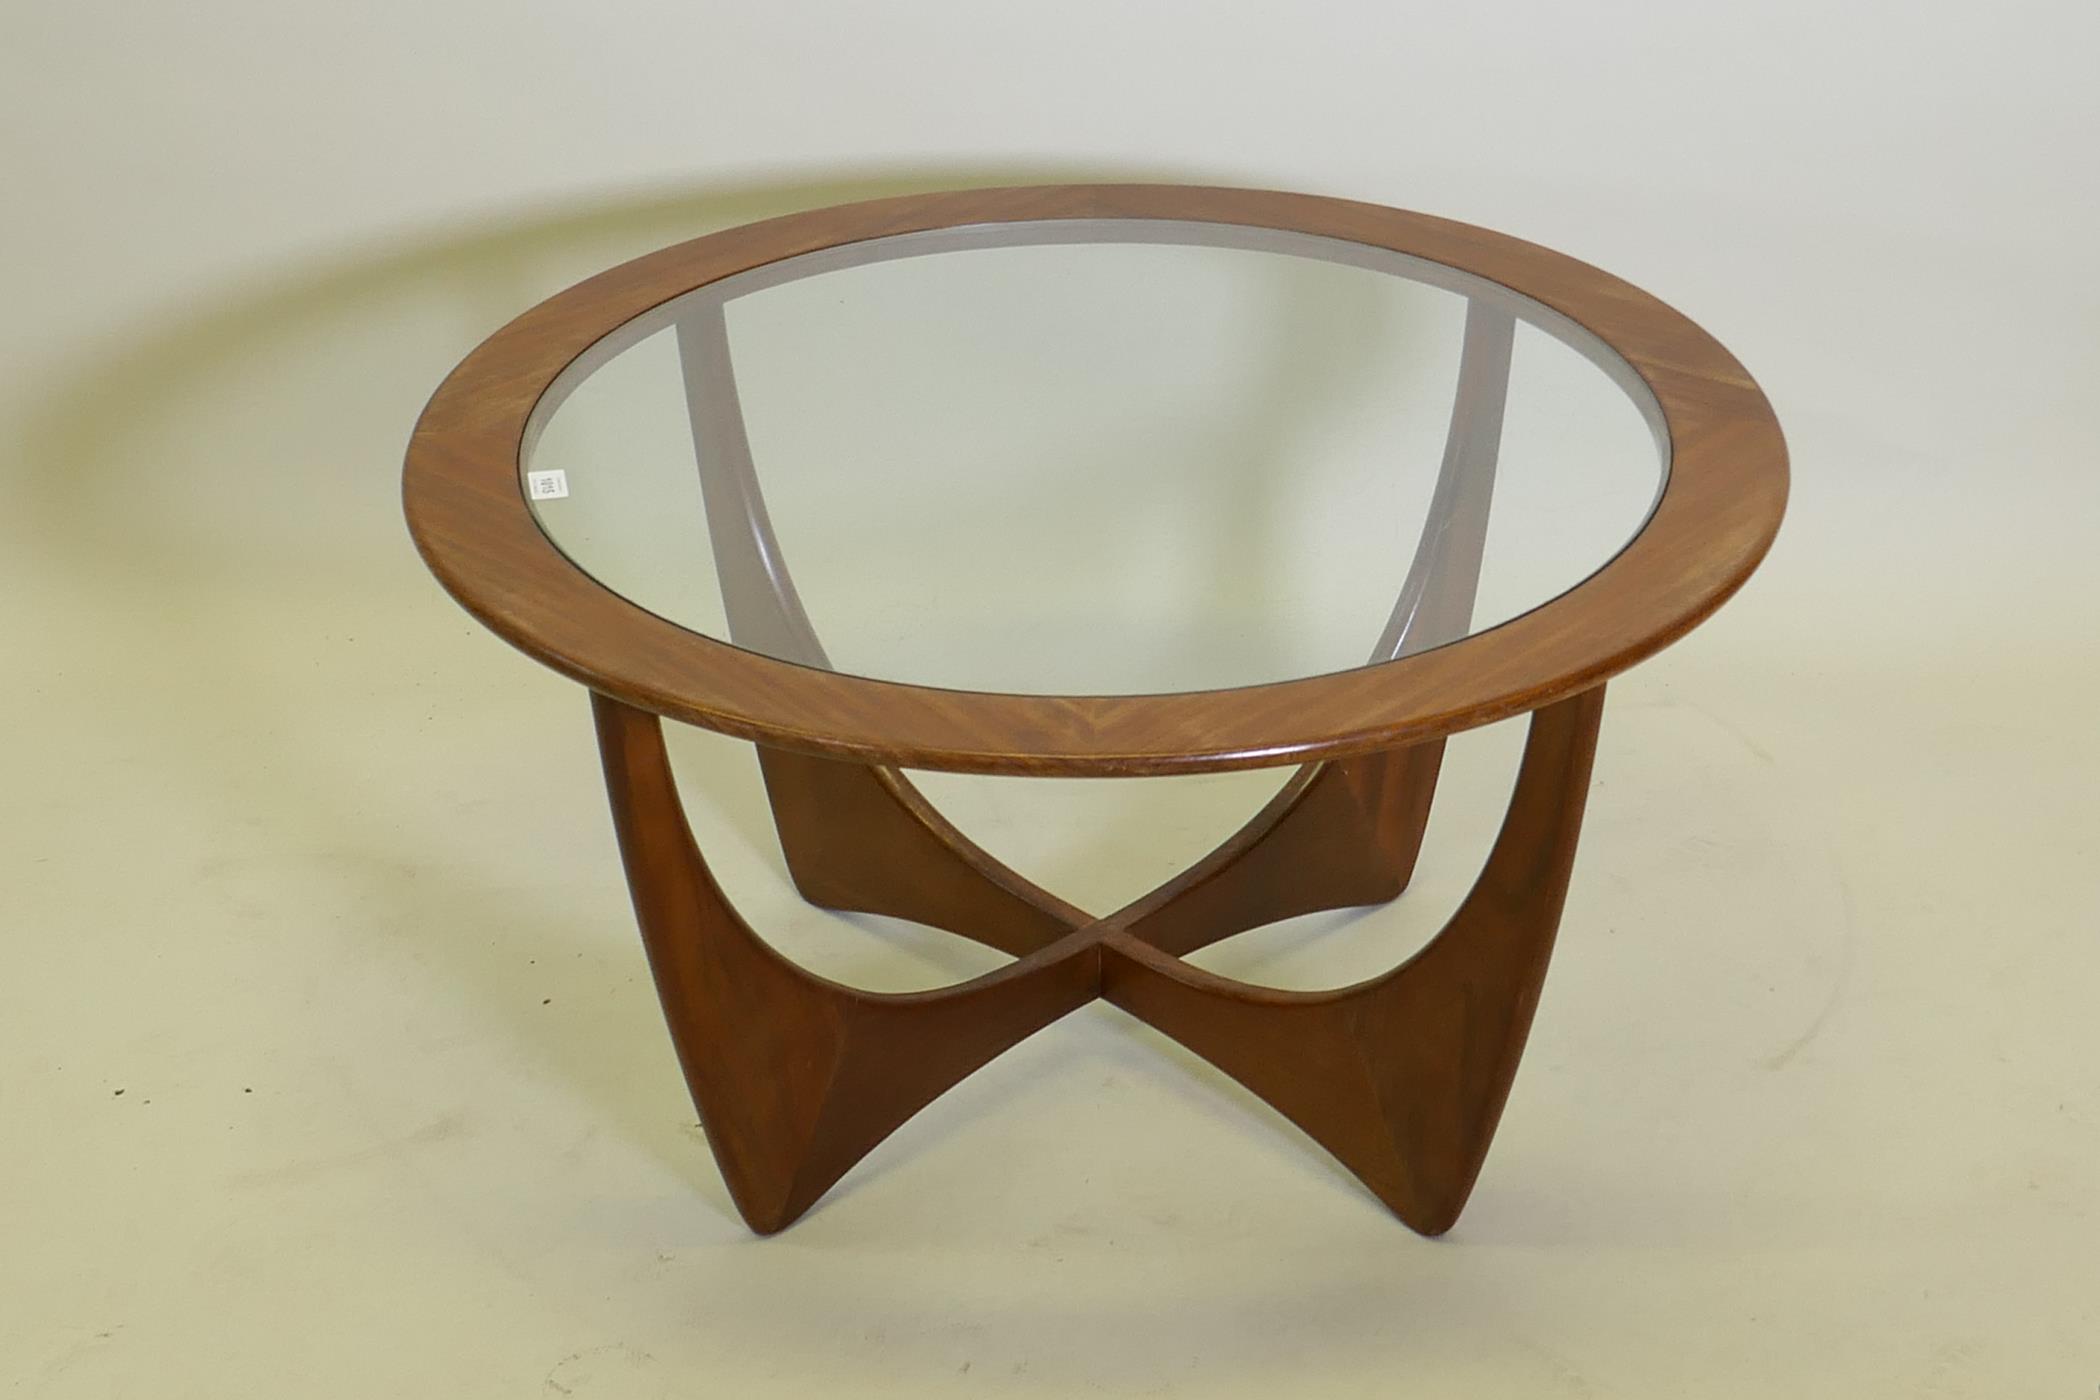 A mid century G-Plan Astro coffee table with inset glass top, 84 dia. x 45 cm high - Image 2 of 2